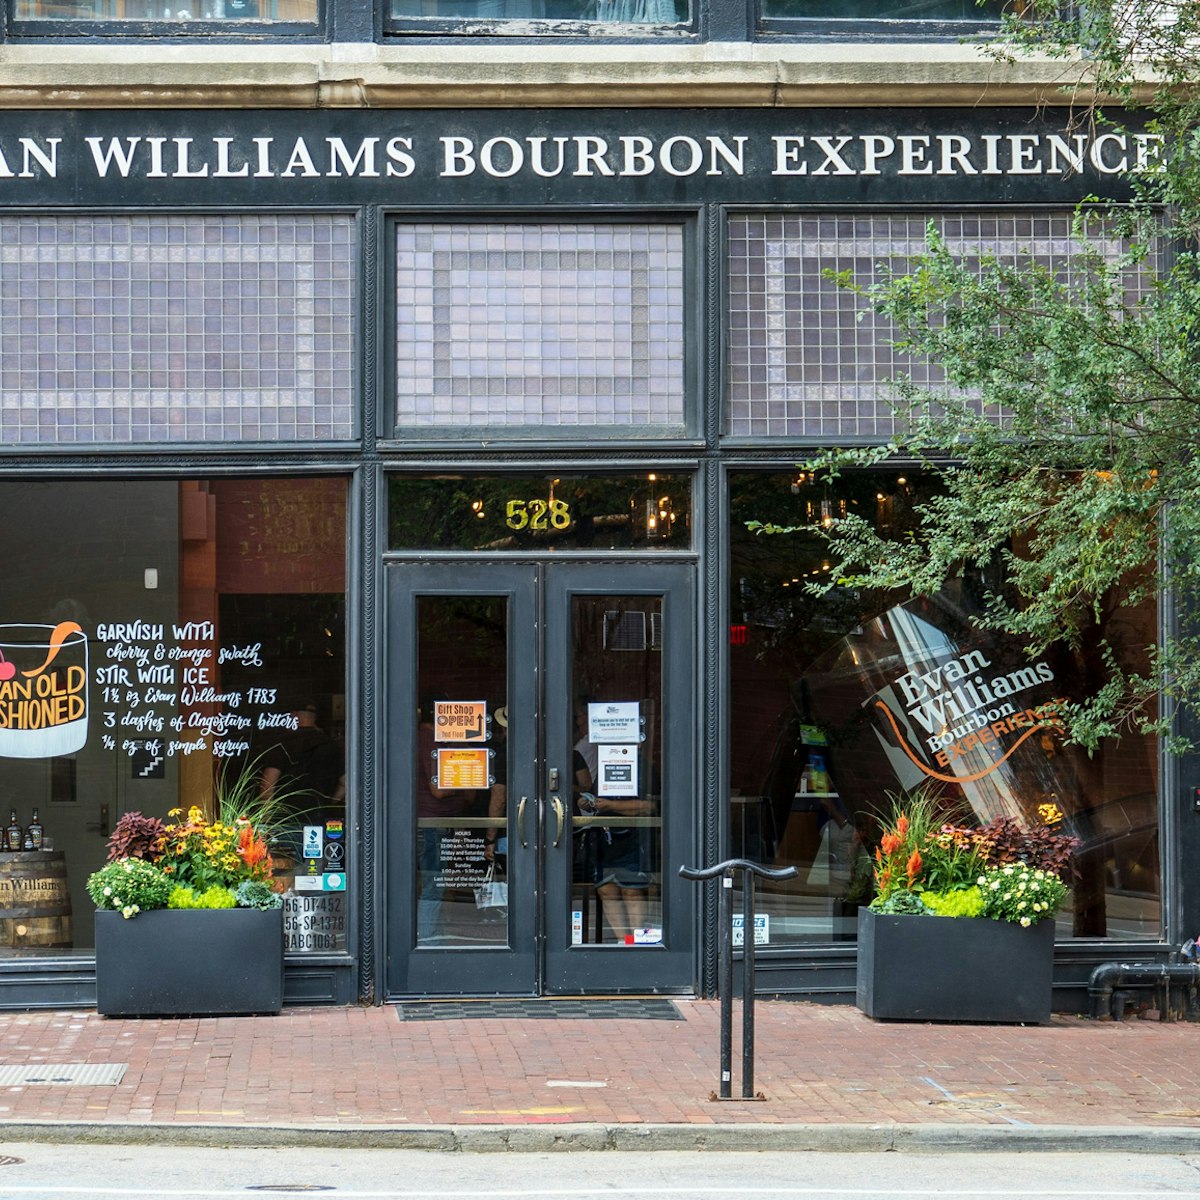 Louisville, KY - Sept. 11, 2021: Evan Williams Bourbon Experience on Whiskey Row is part of the Urban Bourbon Trail and features the world's largest rocks glass in their front window.; Shutterstock ID 2039952233; your: Bridget Brown; gl: 65050; netsuite: Online Editorial; full: POI Image Update